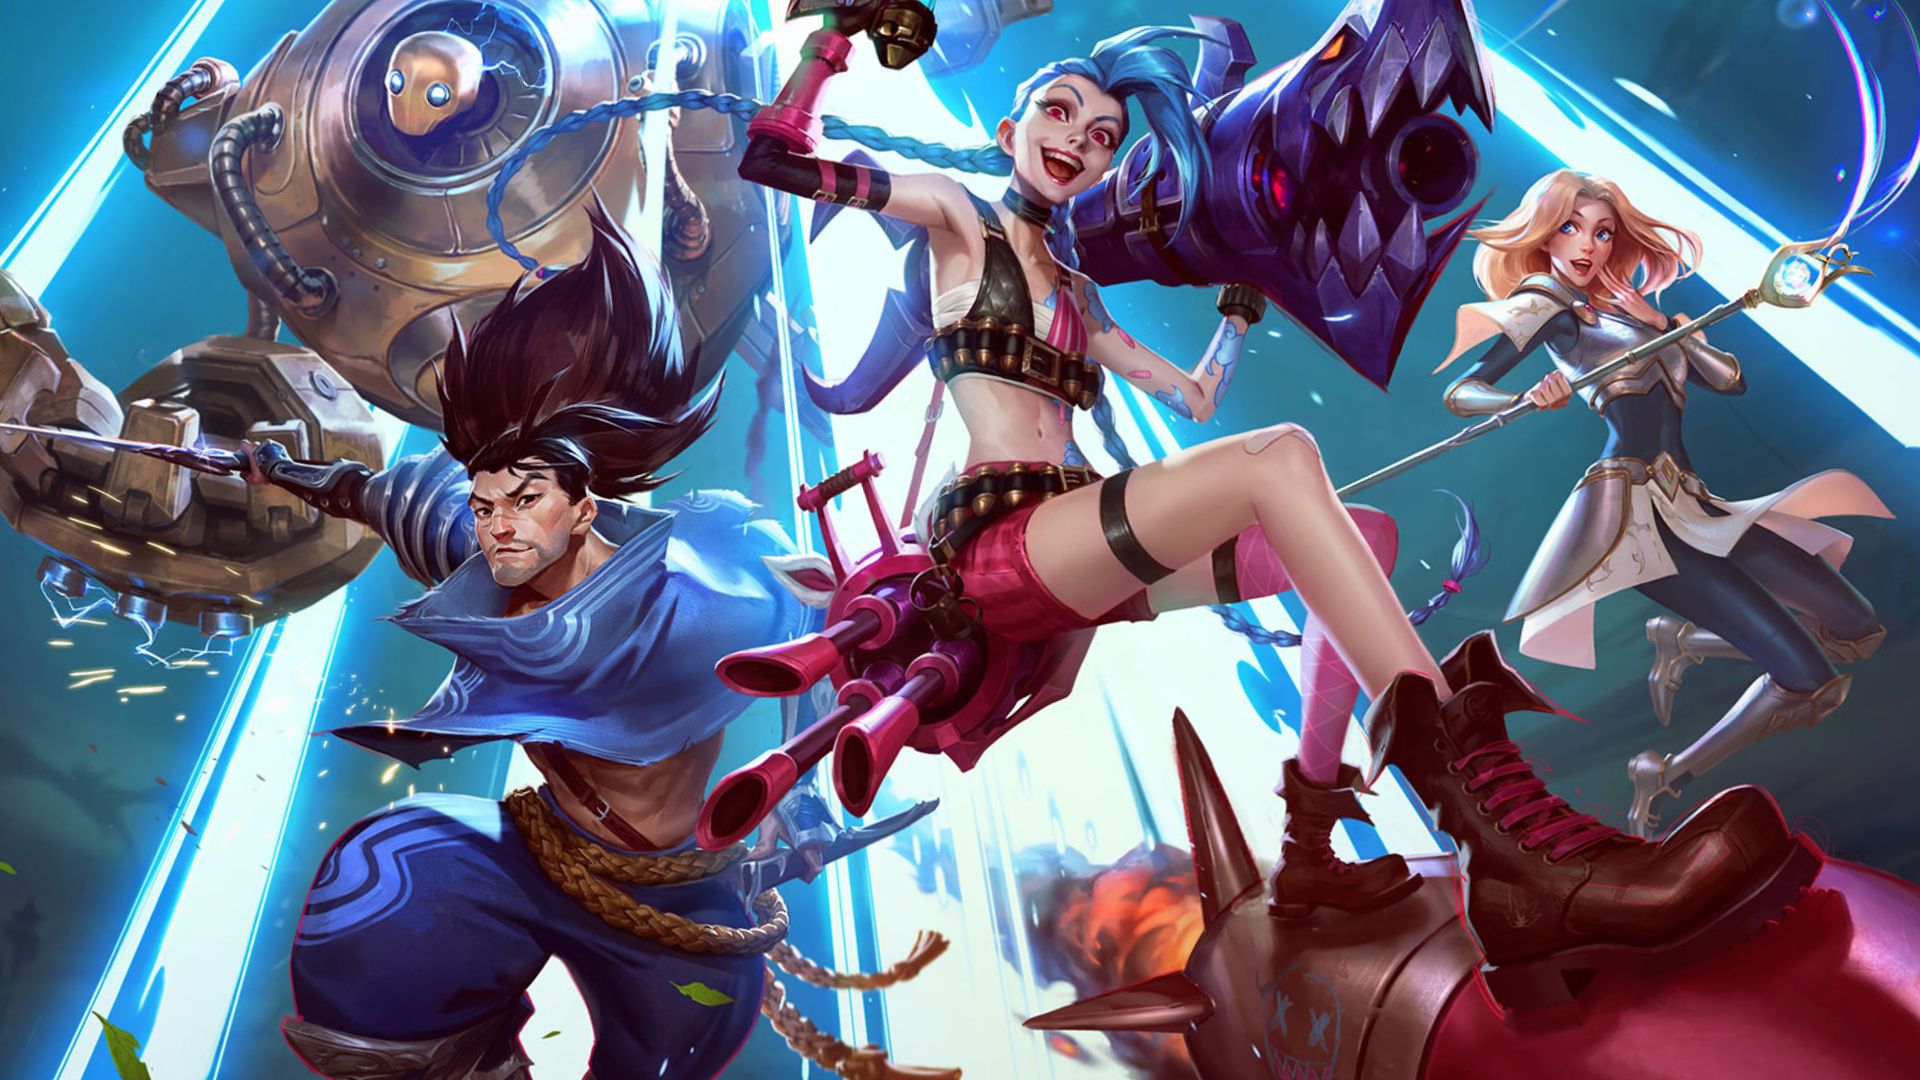 League of Legends is coming to mobile and consoles with Wild Rift - Polygon